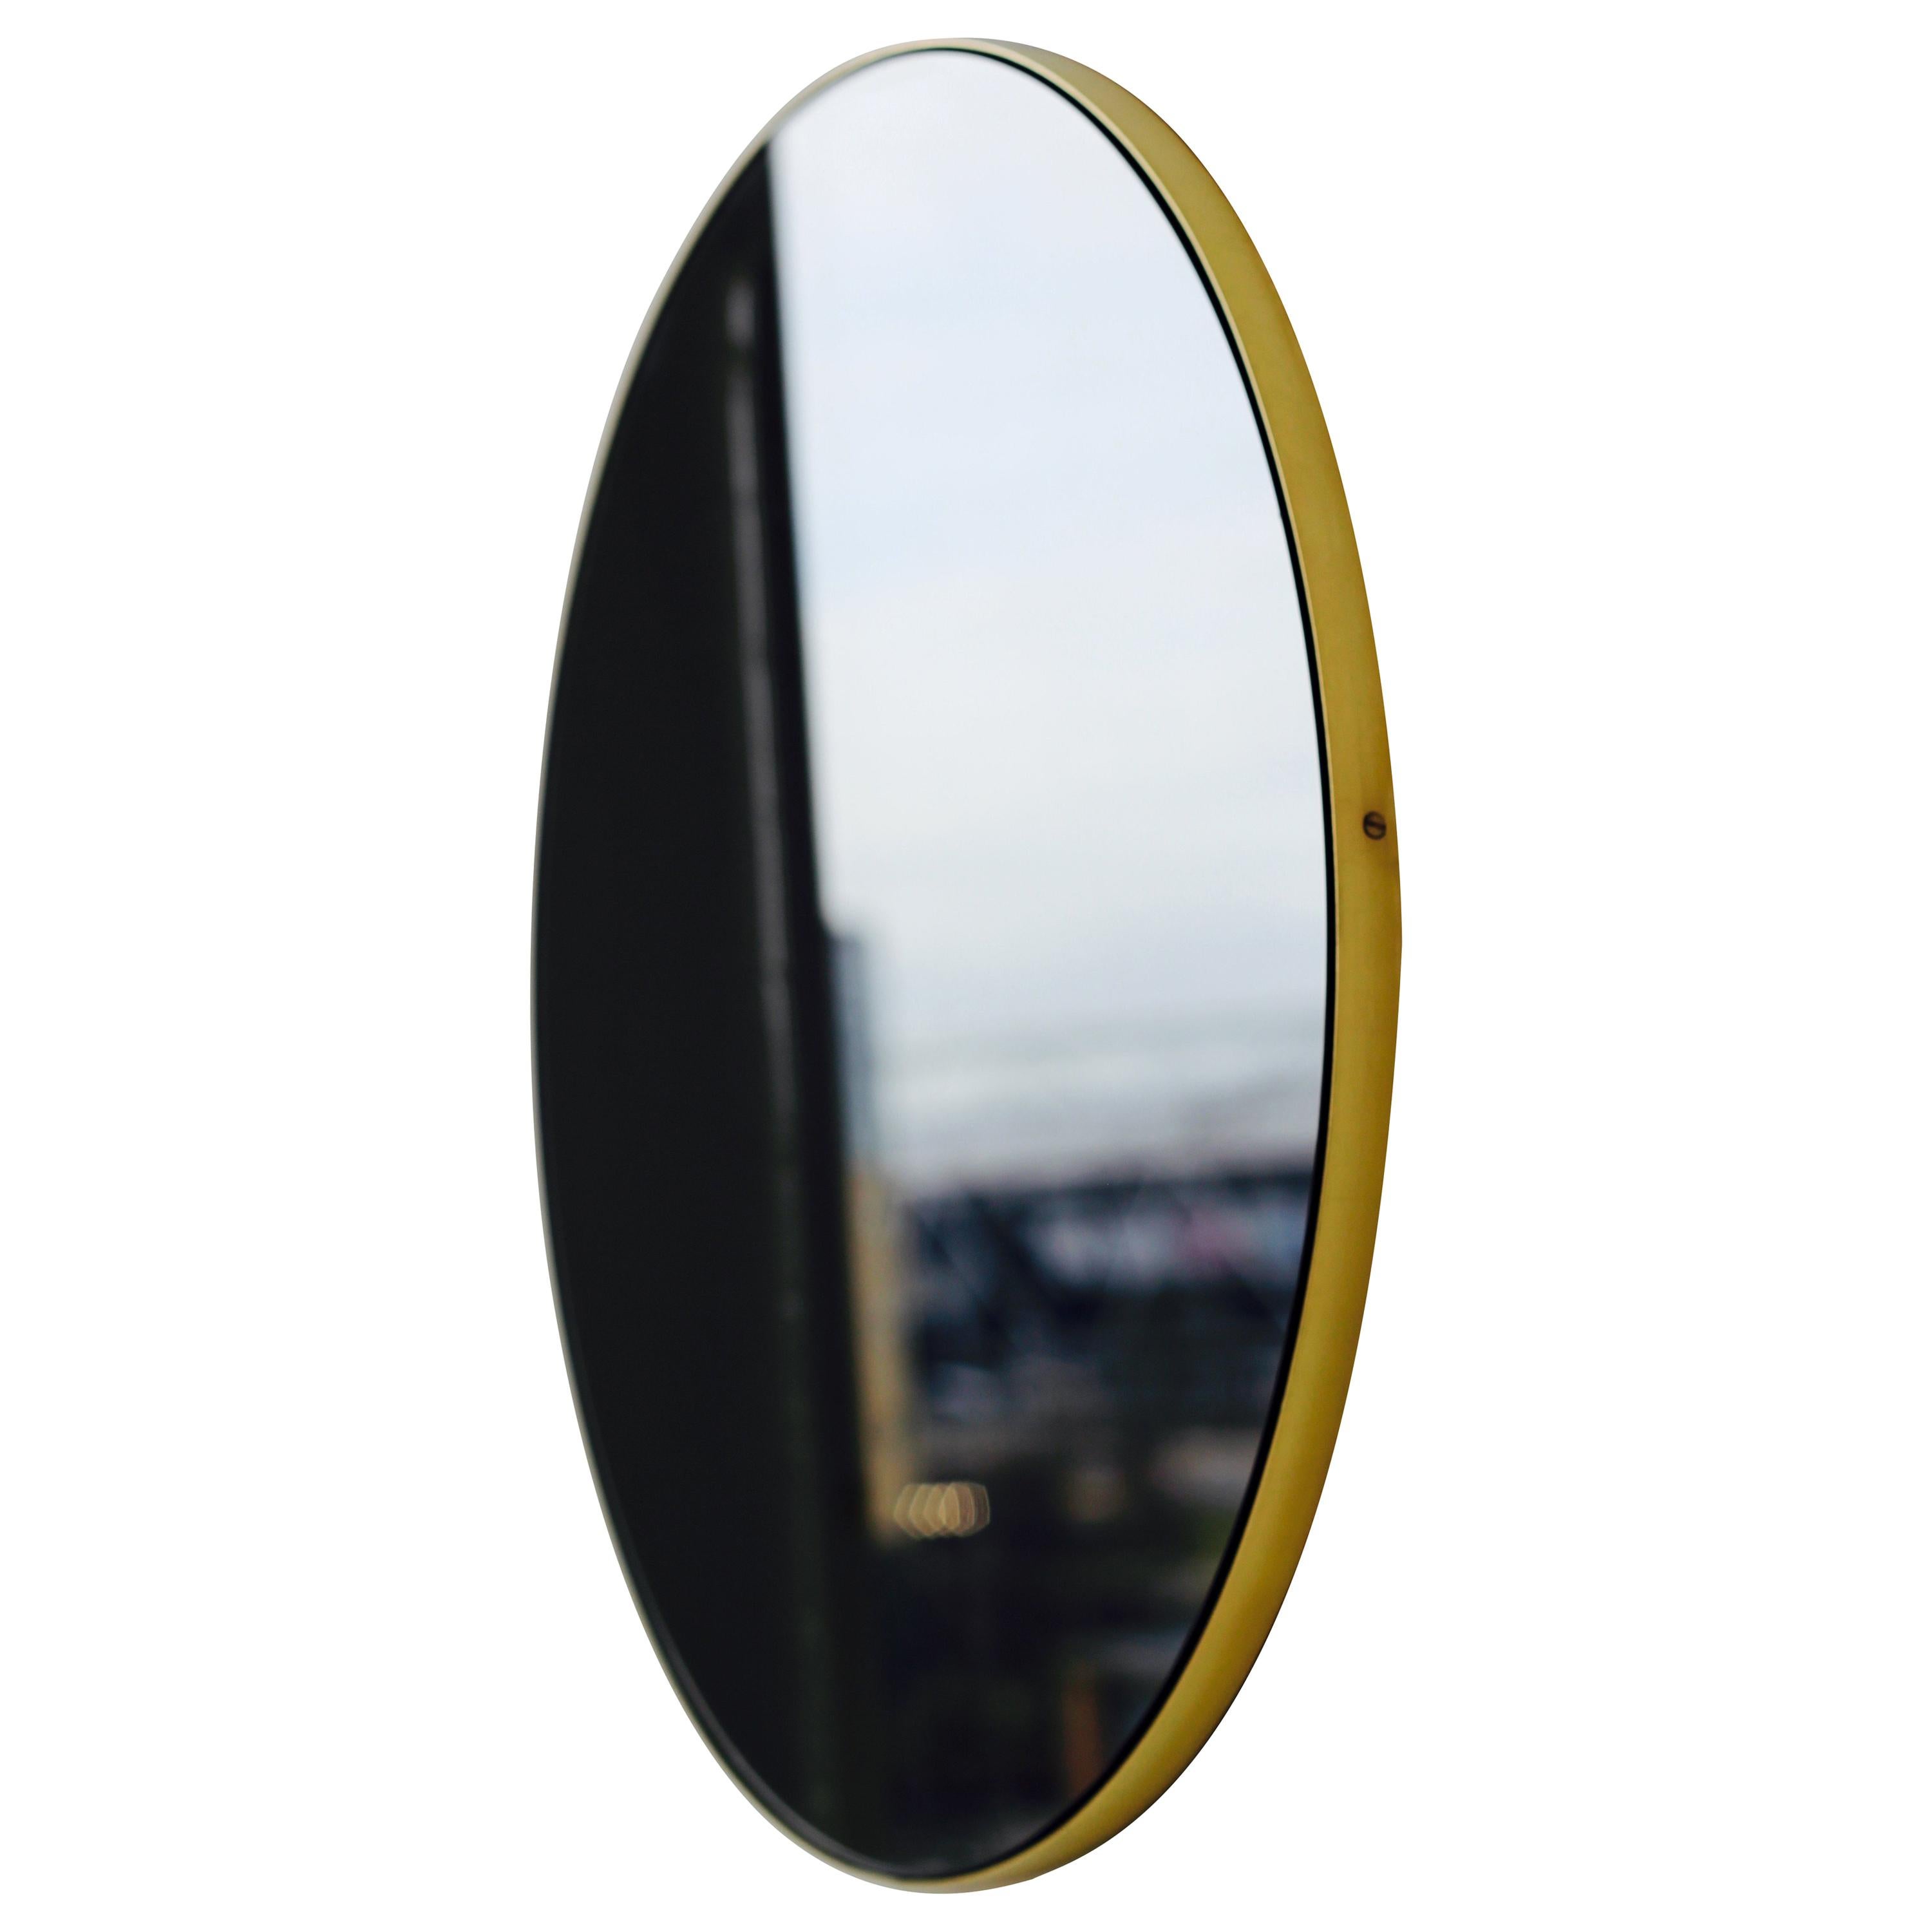 Orbis Black Tinted Round Contemporary Mirror with a Brass Frame, XL